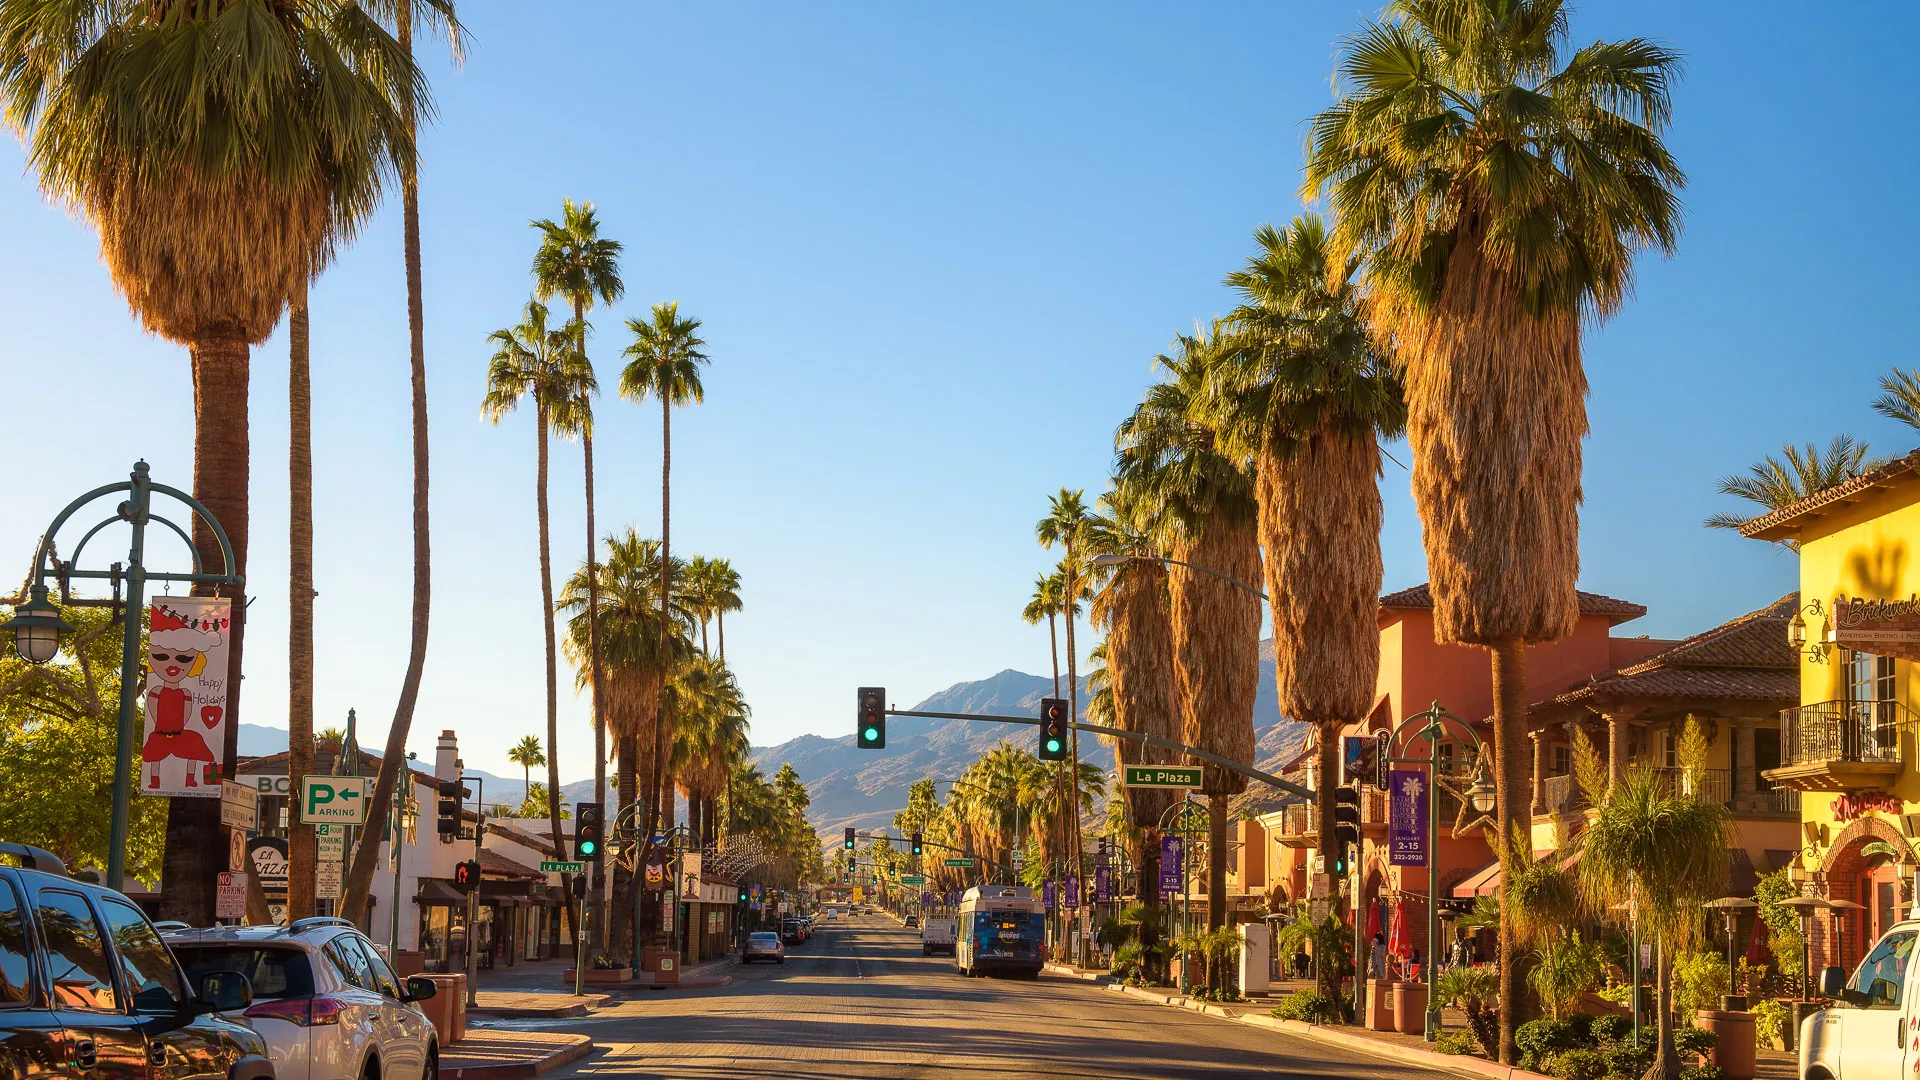 Palm Springs, California, USA - December 27, 2017 : Scenic street view of Palm Springs at sunrise.